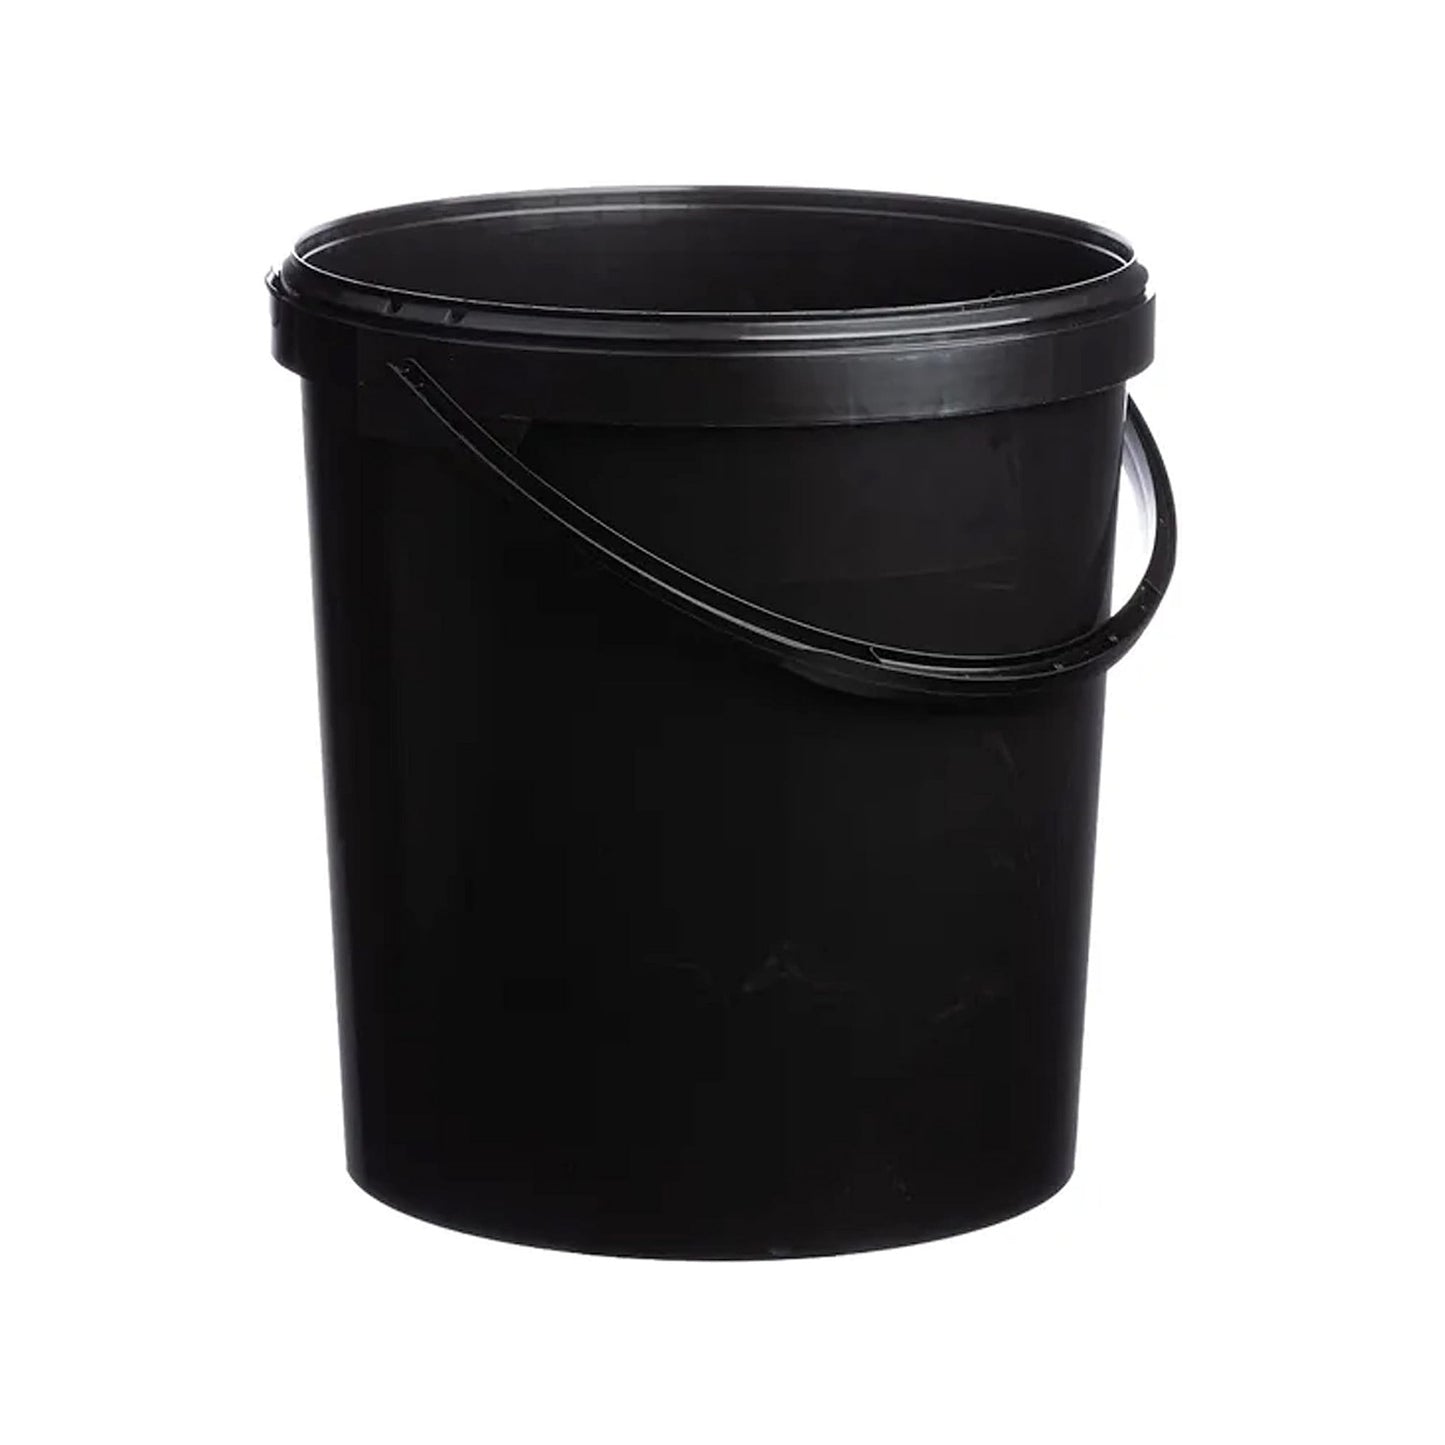 Black & White Strong 5L 10L 25L Hard Wearing Plastic Buckets With Tamper Evident Lids & Handles